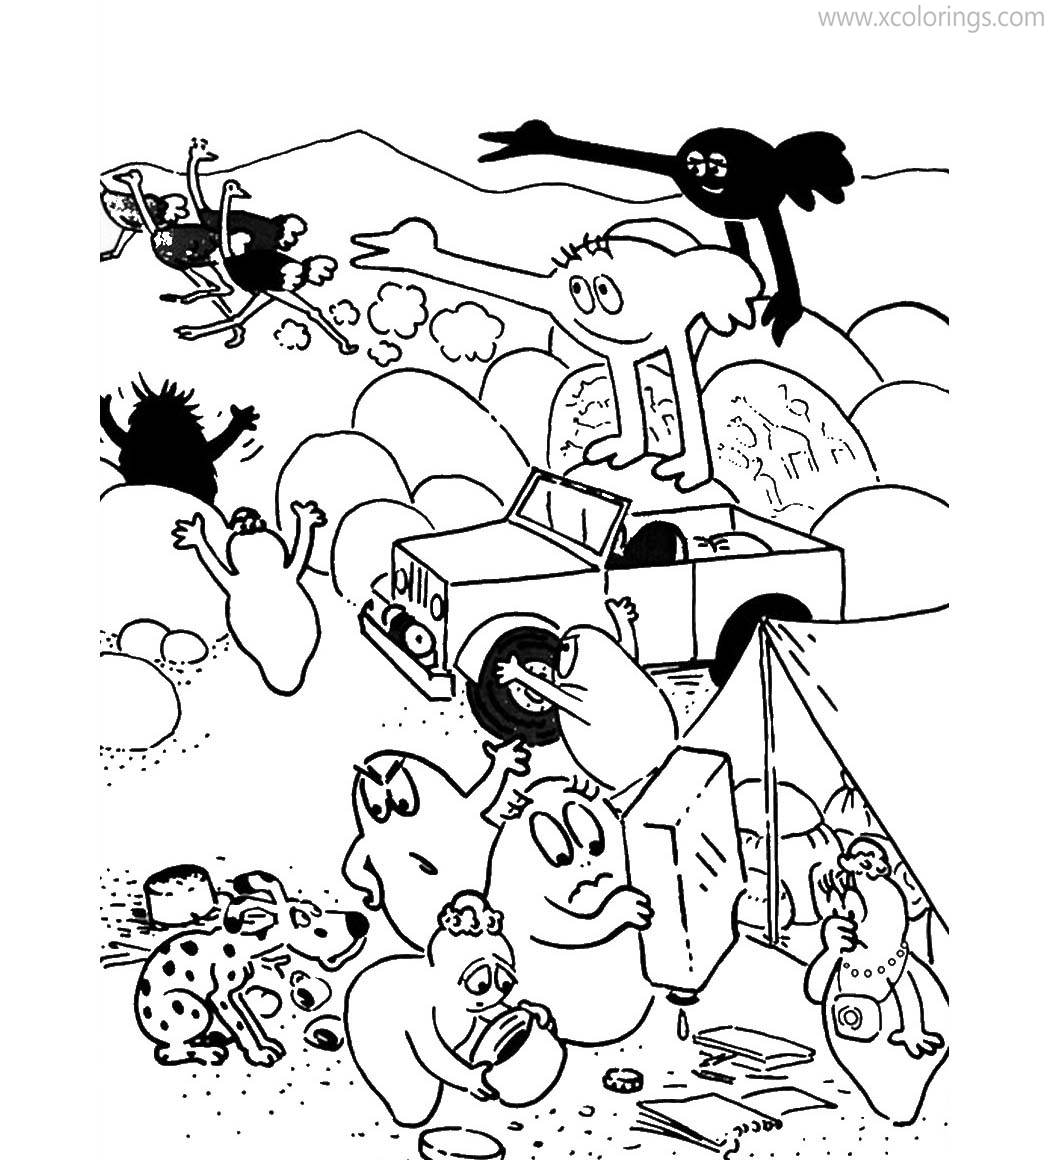 Free Barbapapa Coloring Pages Camping in Africa printable